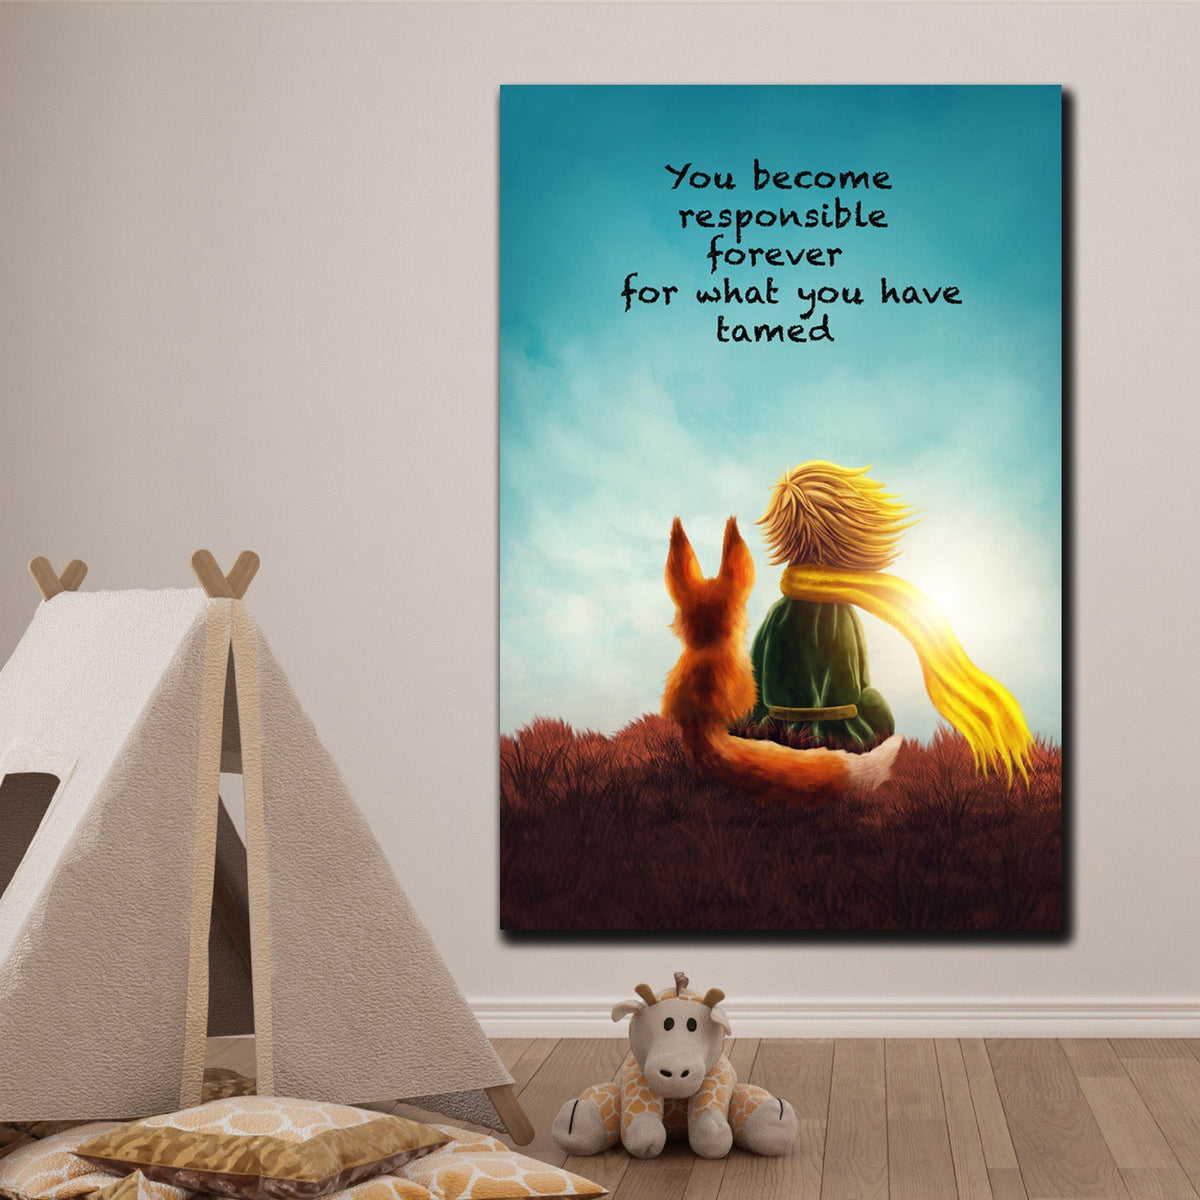 https://cdn.shopify.com/s/files/1/0387/9986/8044/products/TheFoxQuotefromTheLittlePrinceCanvasArtprintStretched-4.jpg